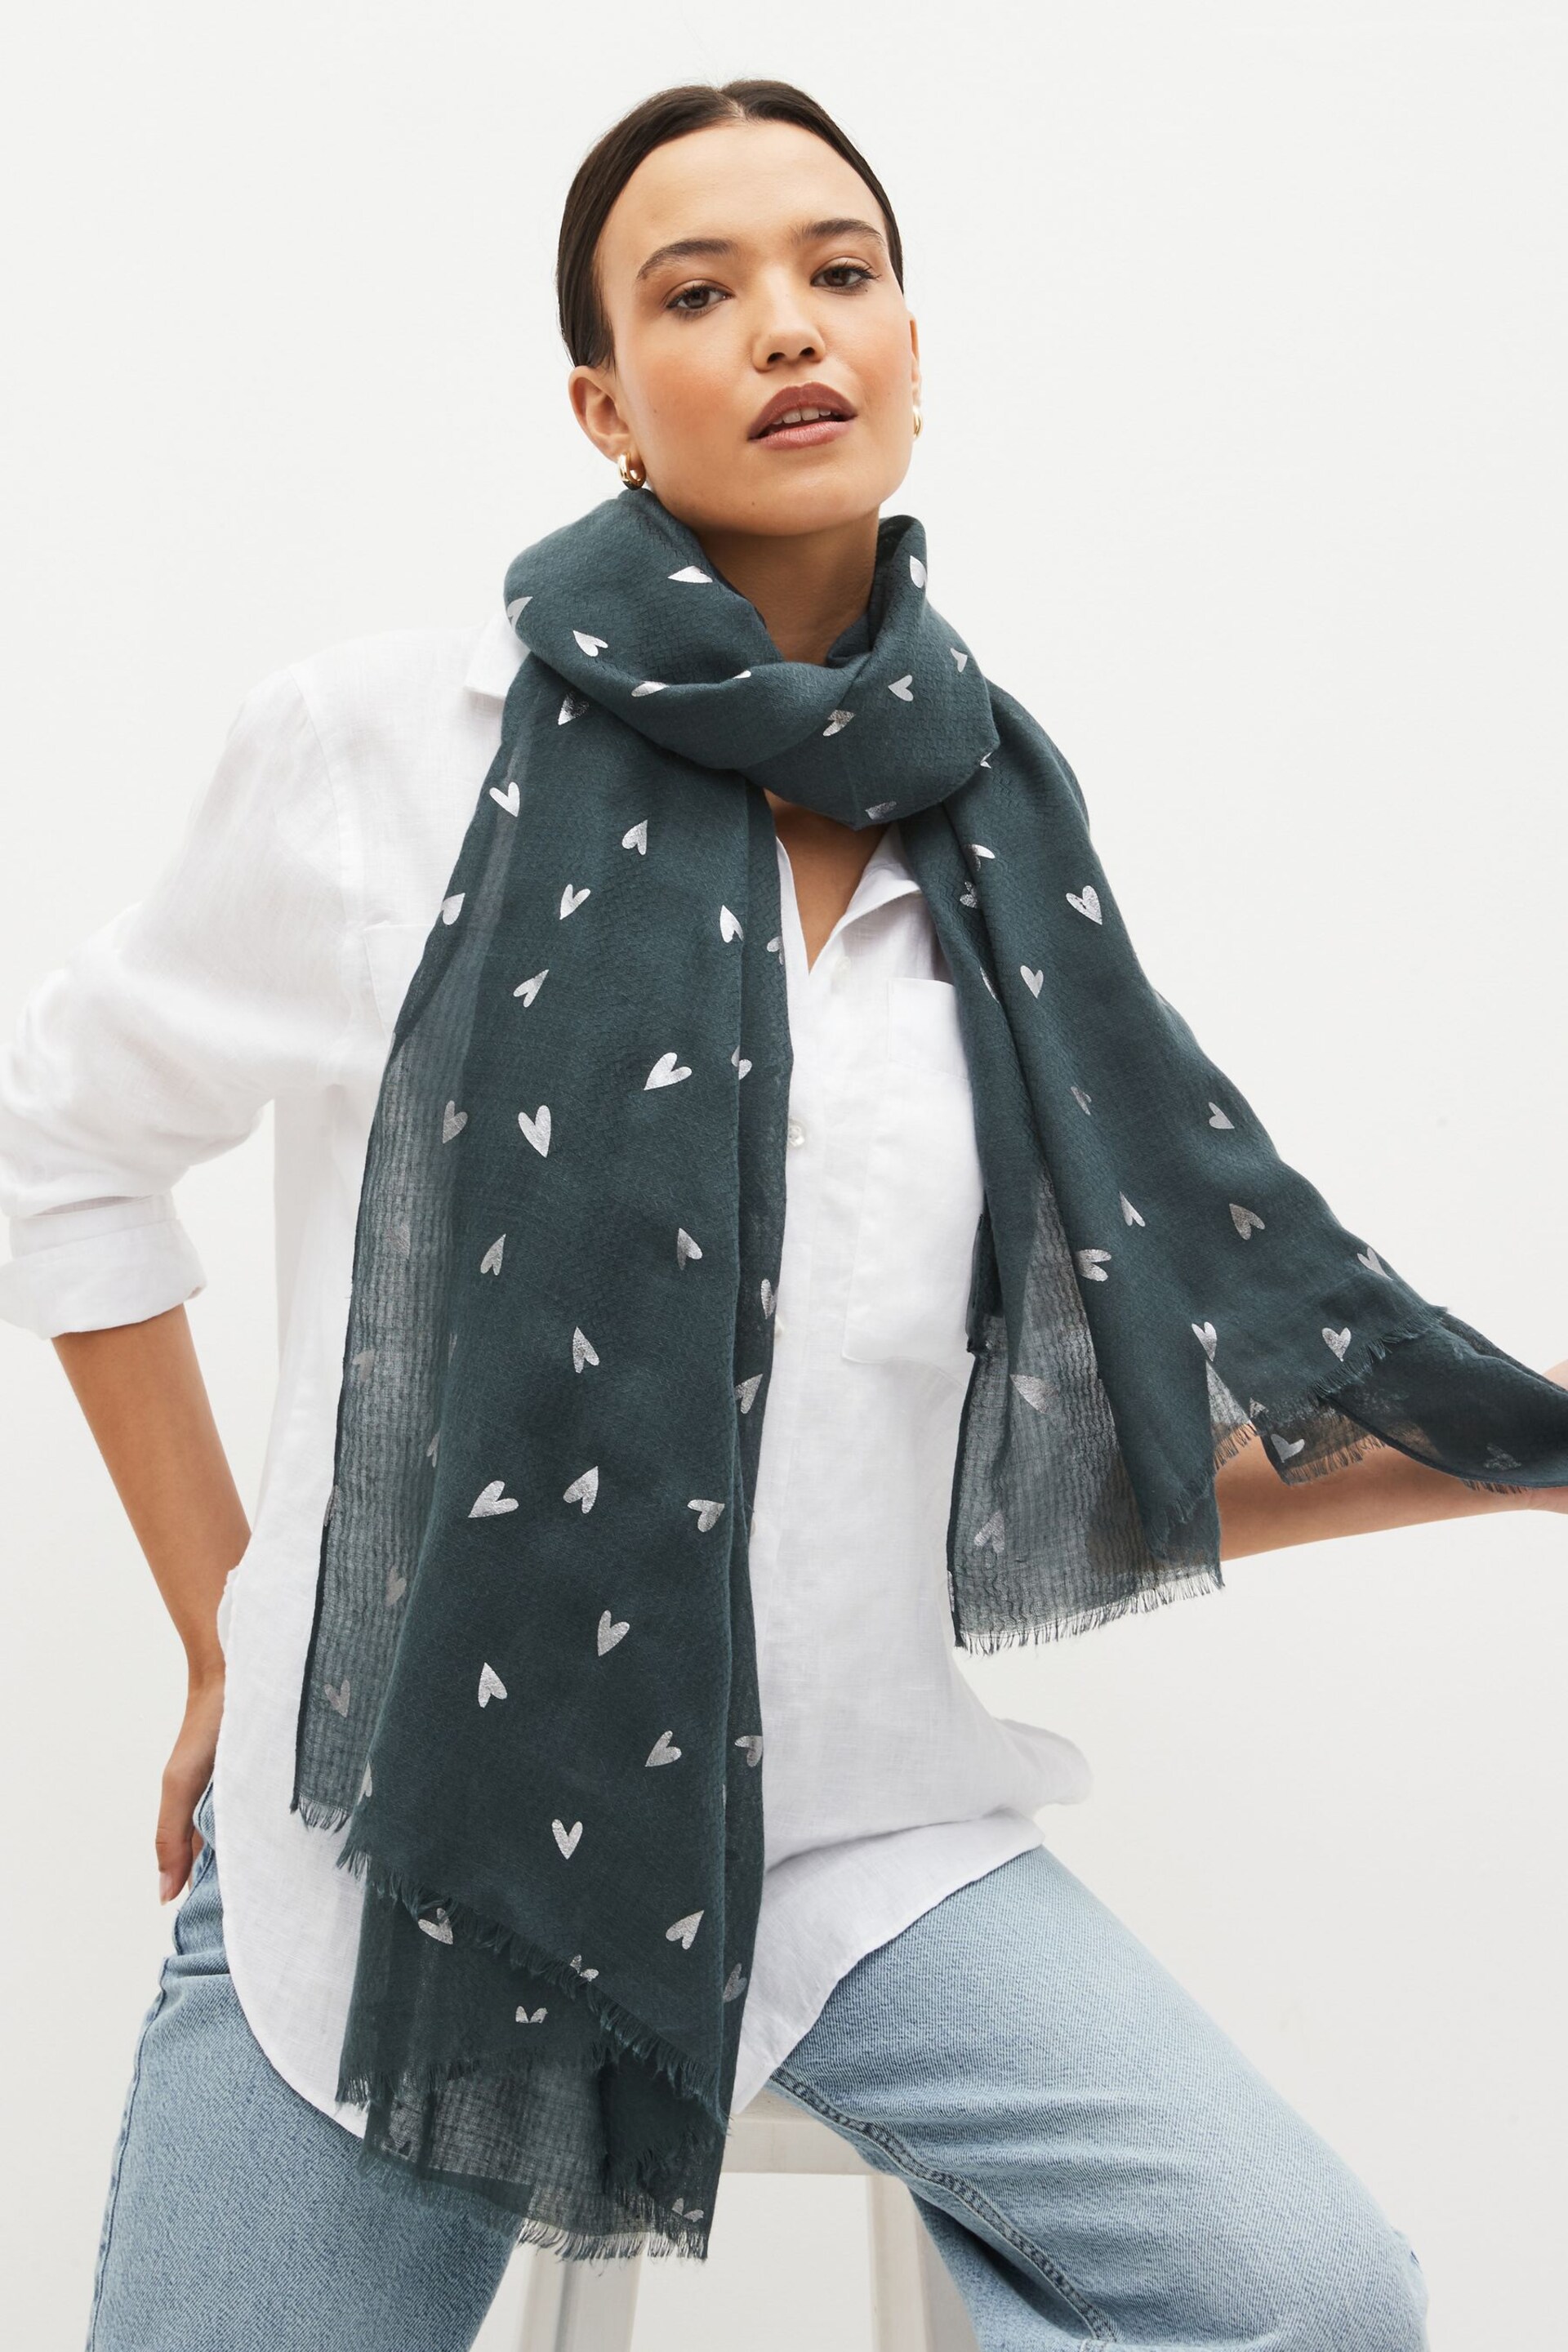 Charcoal Grey Foil Lightweight Scarf - Image 1 of 8